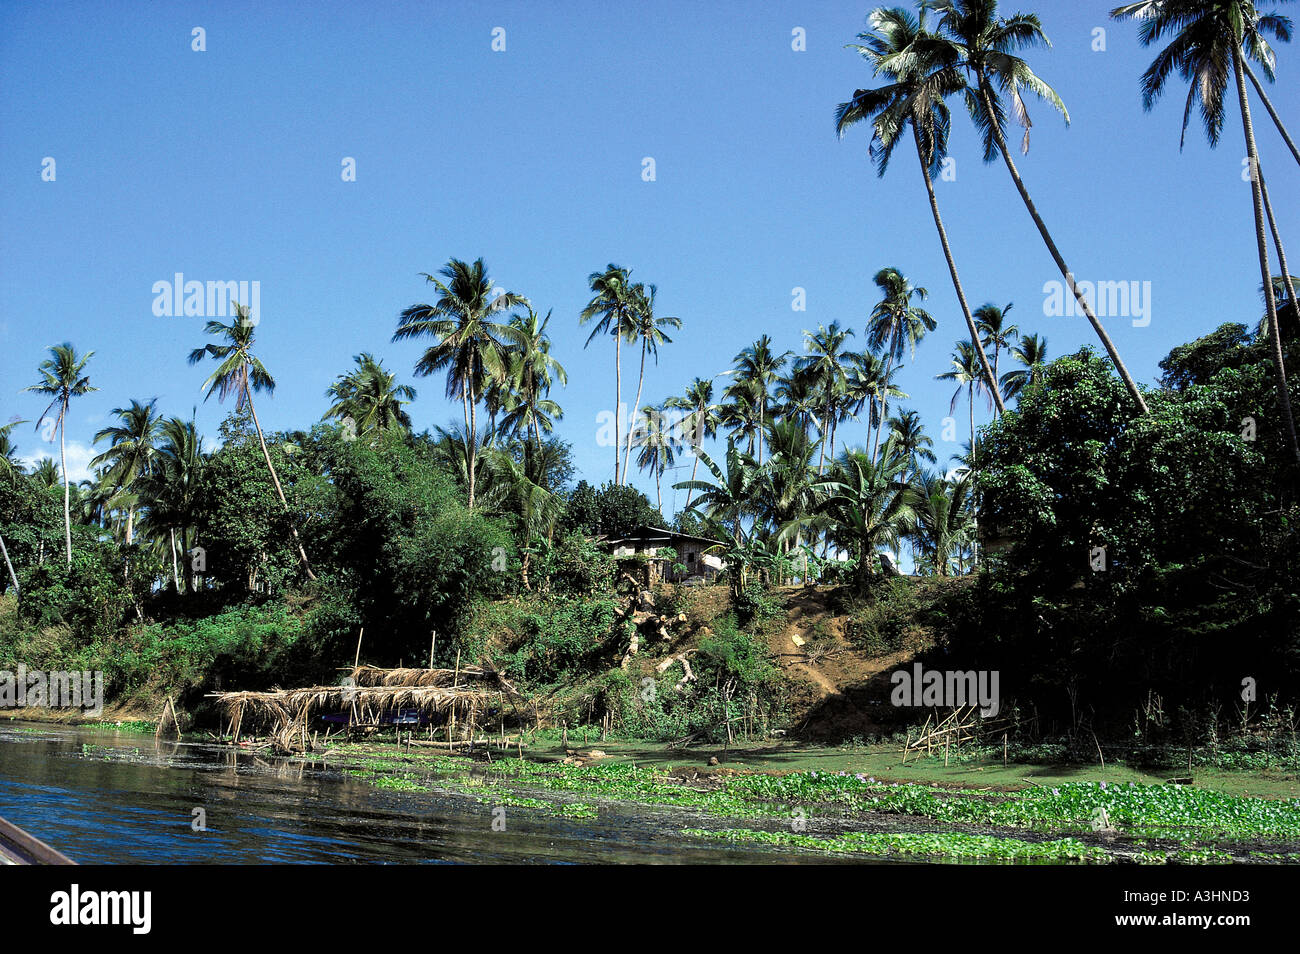 palmtrees at river area of pagsanjan philippines Stock Photo